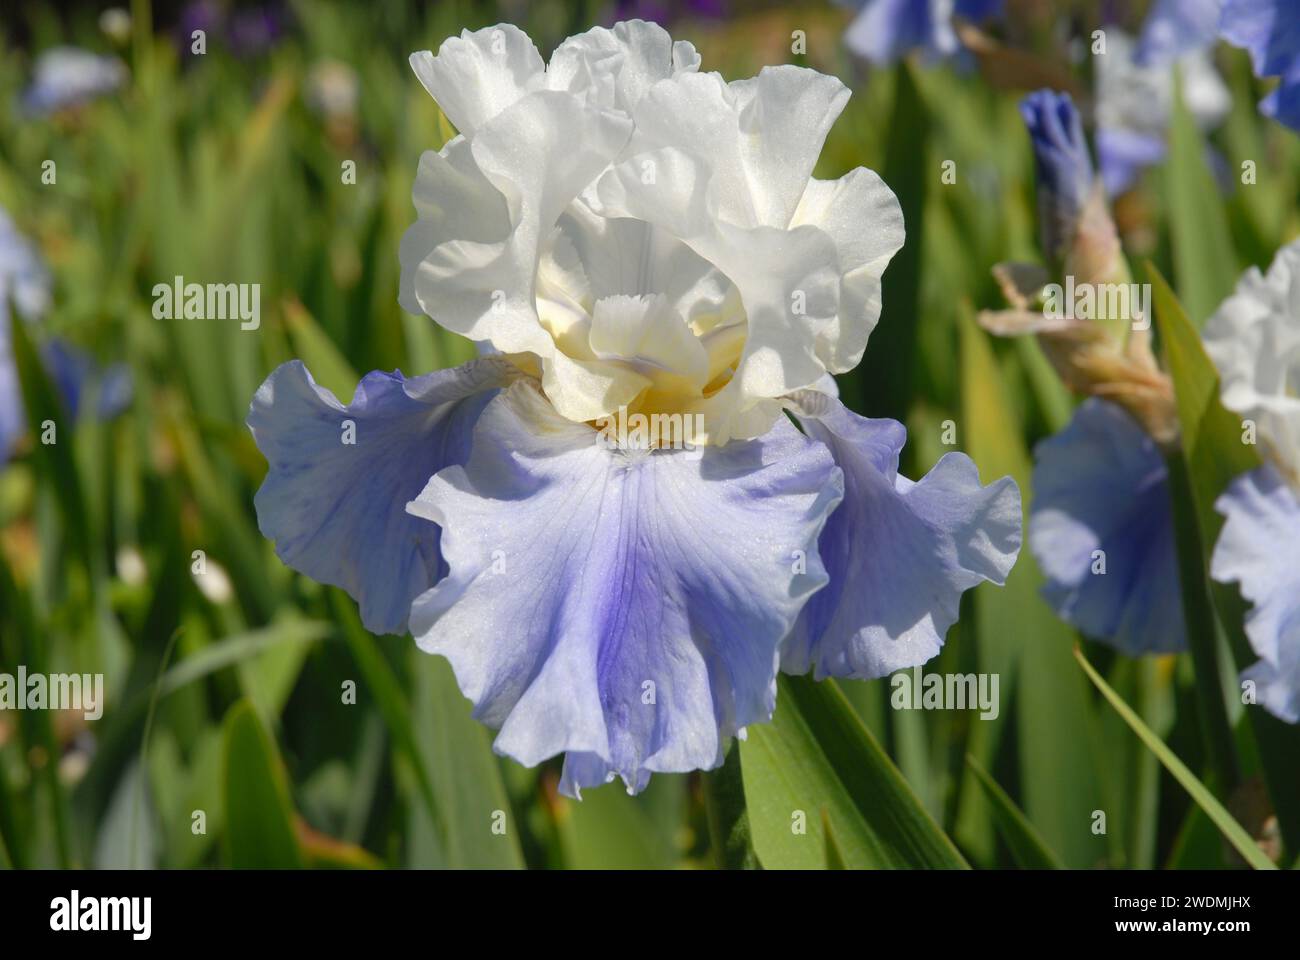 Tall bearded iris flower, known as Stairway to Heaven, white and purple with yellow beard Stock Photo